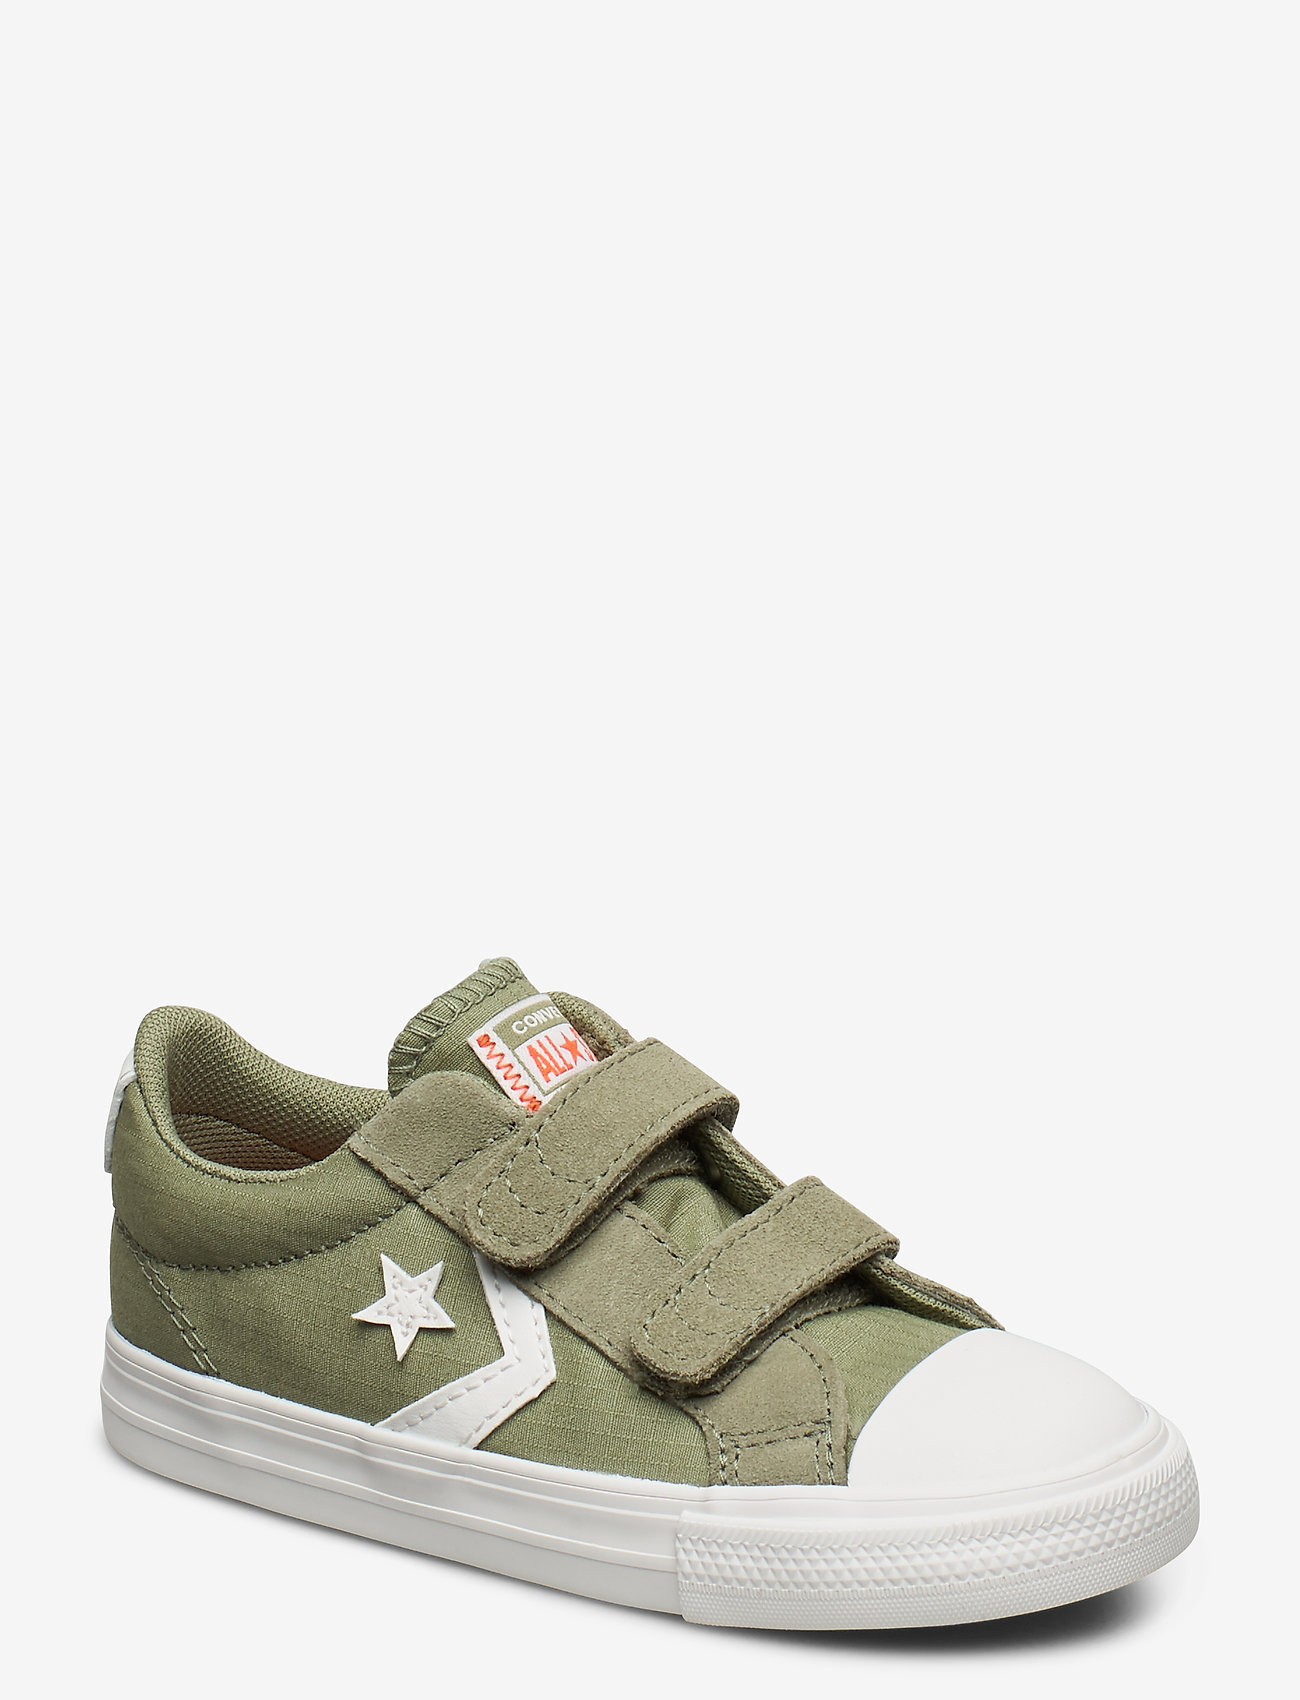 Converse Star Player 2v - Low Tops 